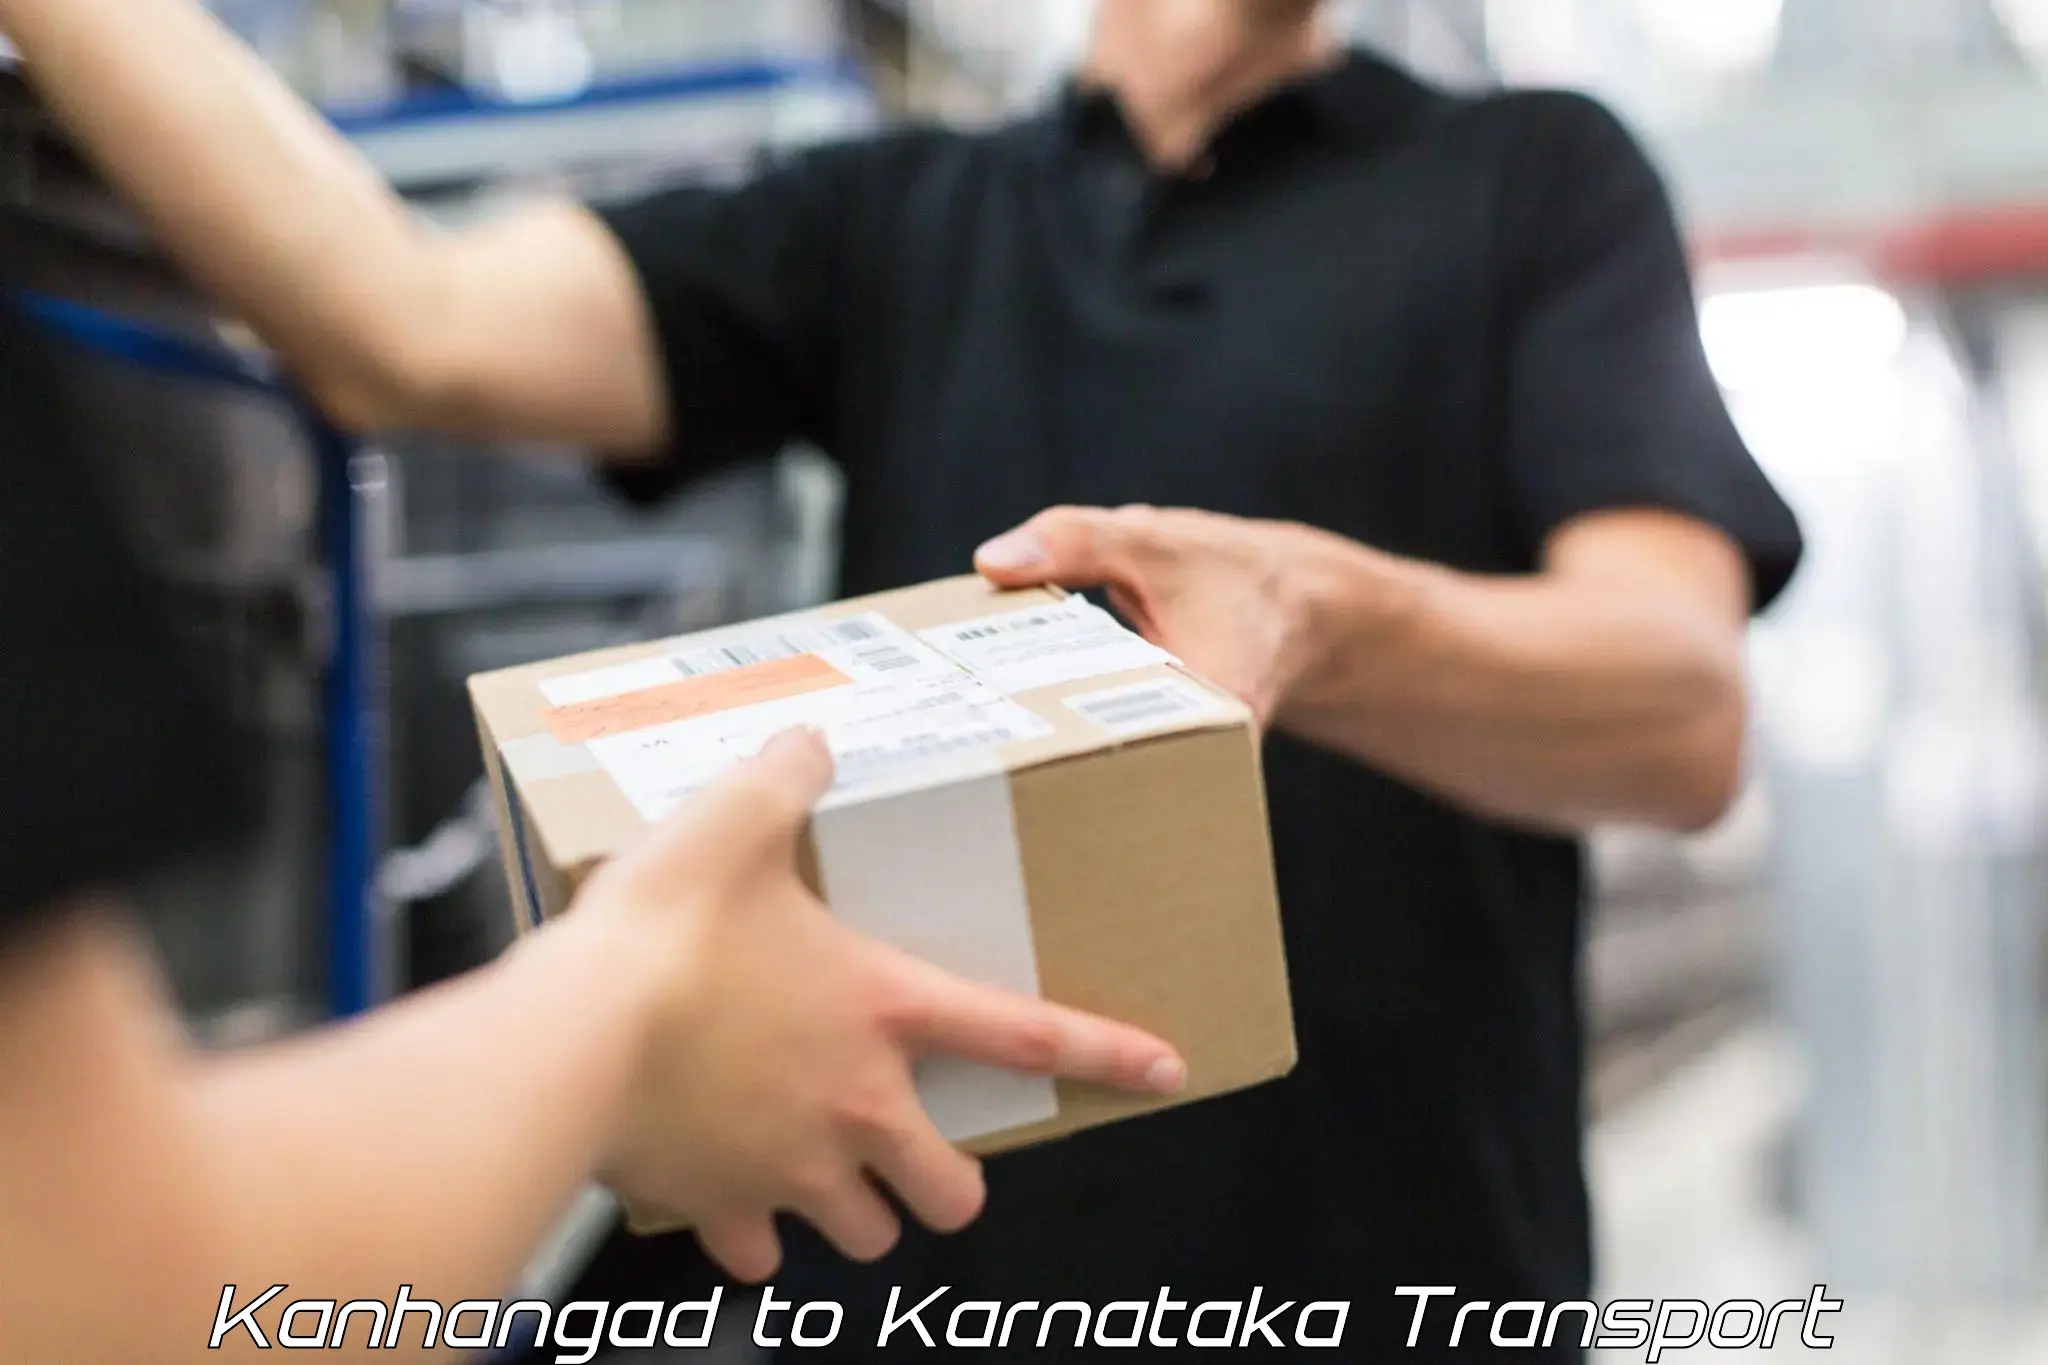 Nationwide transport services Kanhangad to Holalkere